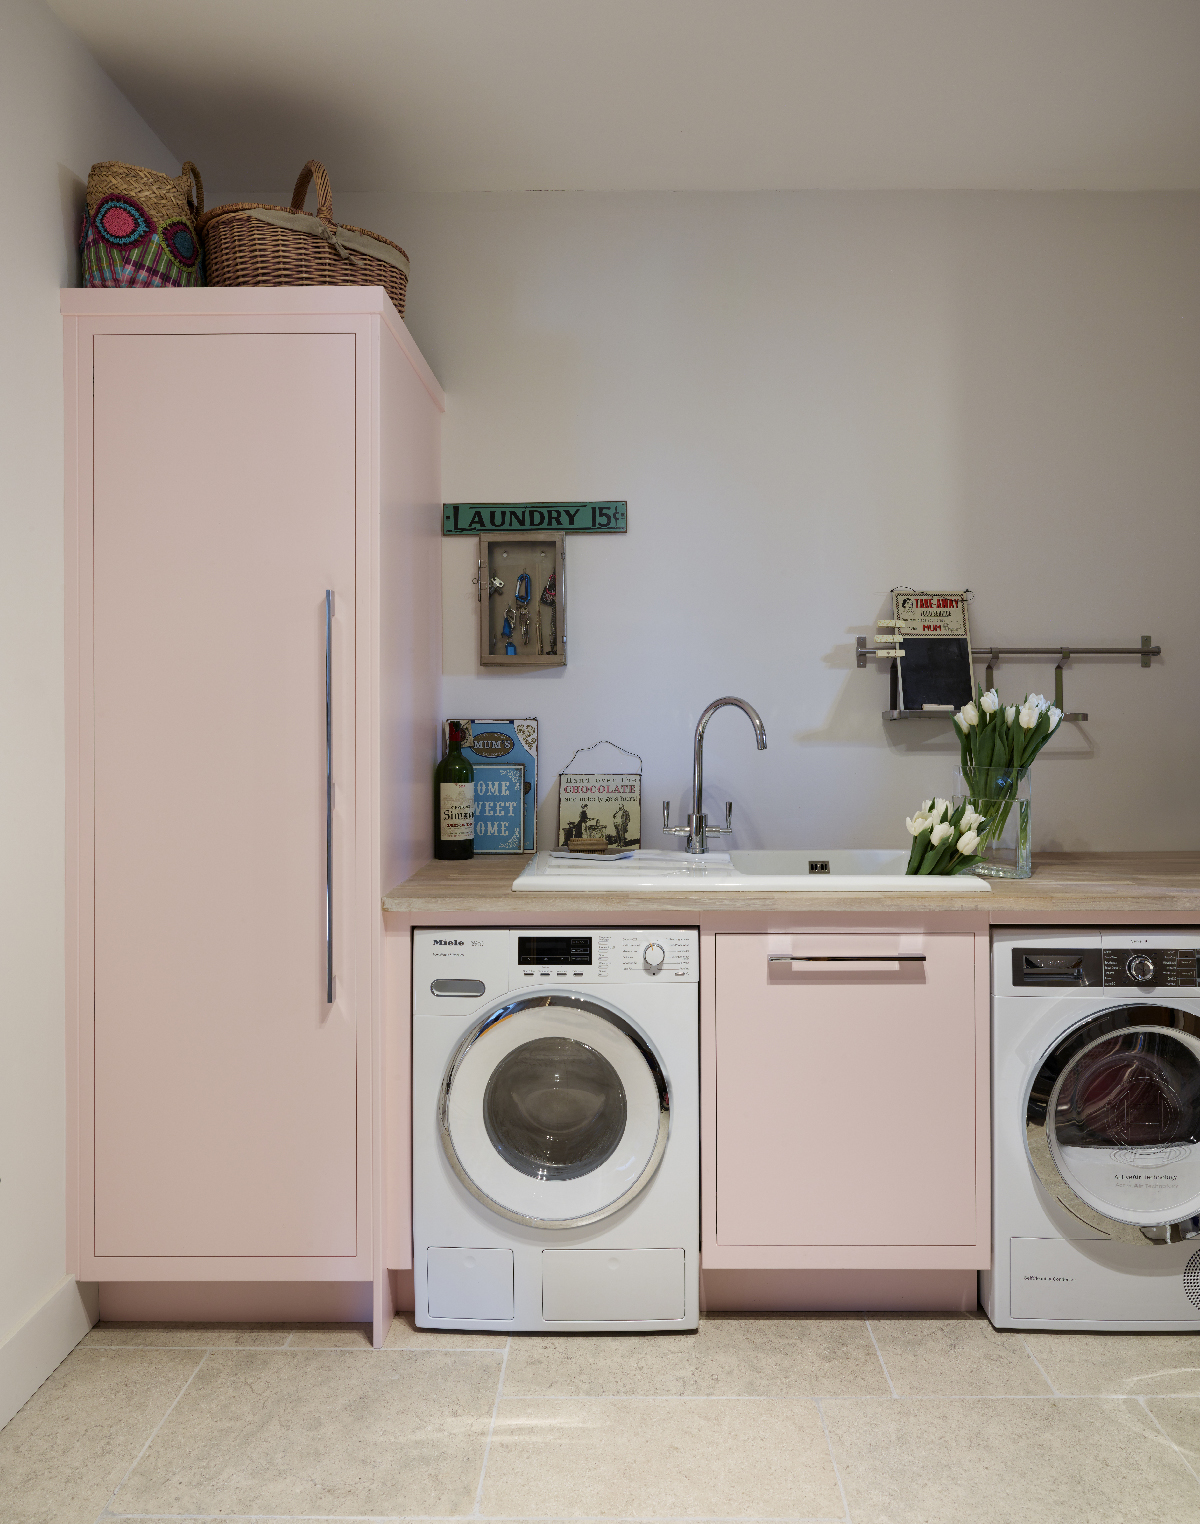 Want a laundry room? Come this way for tips on creating one